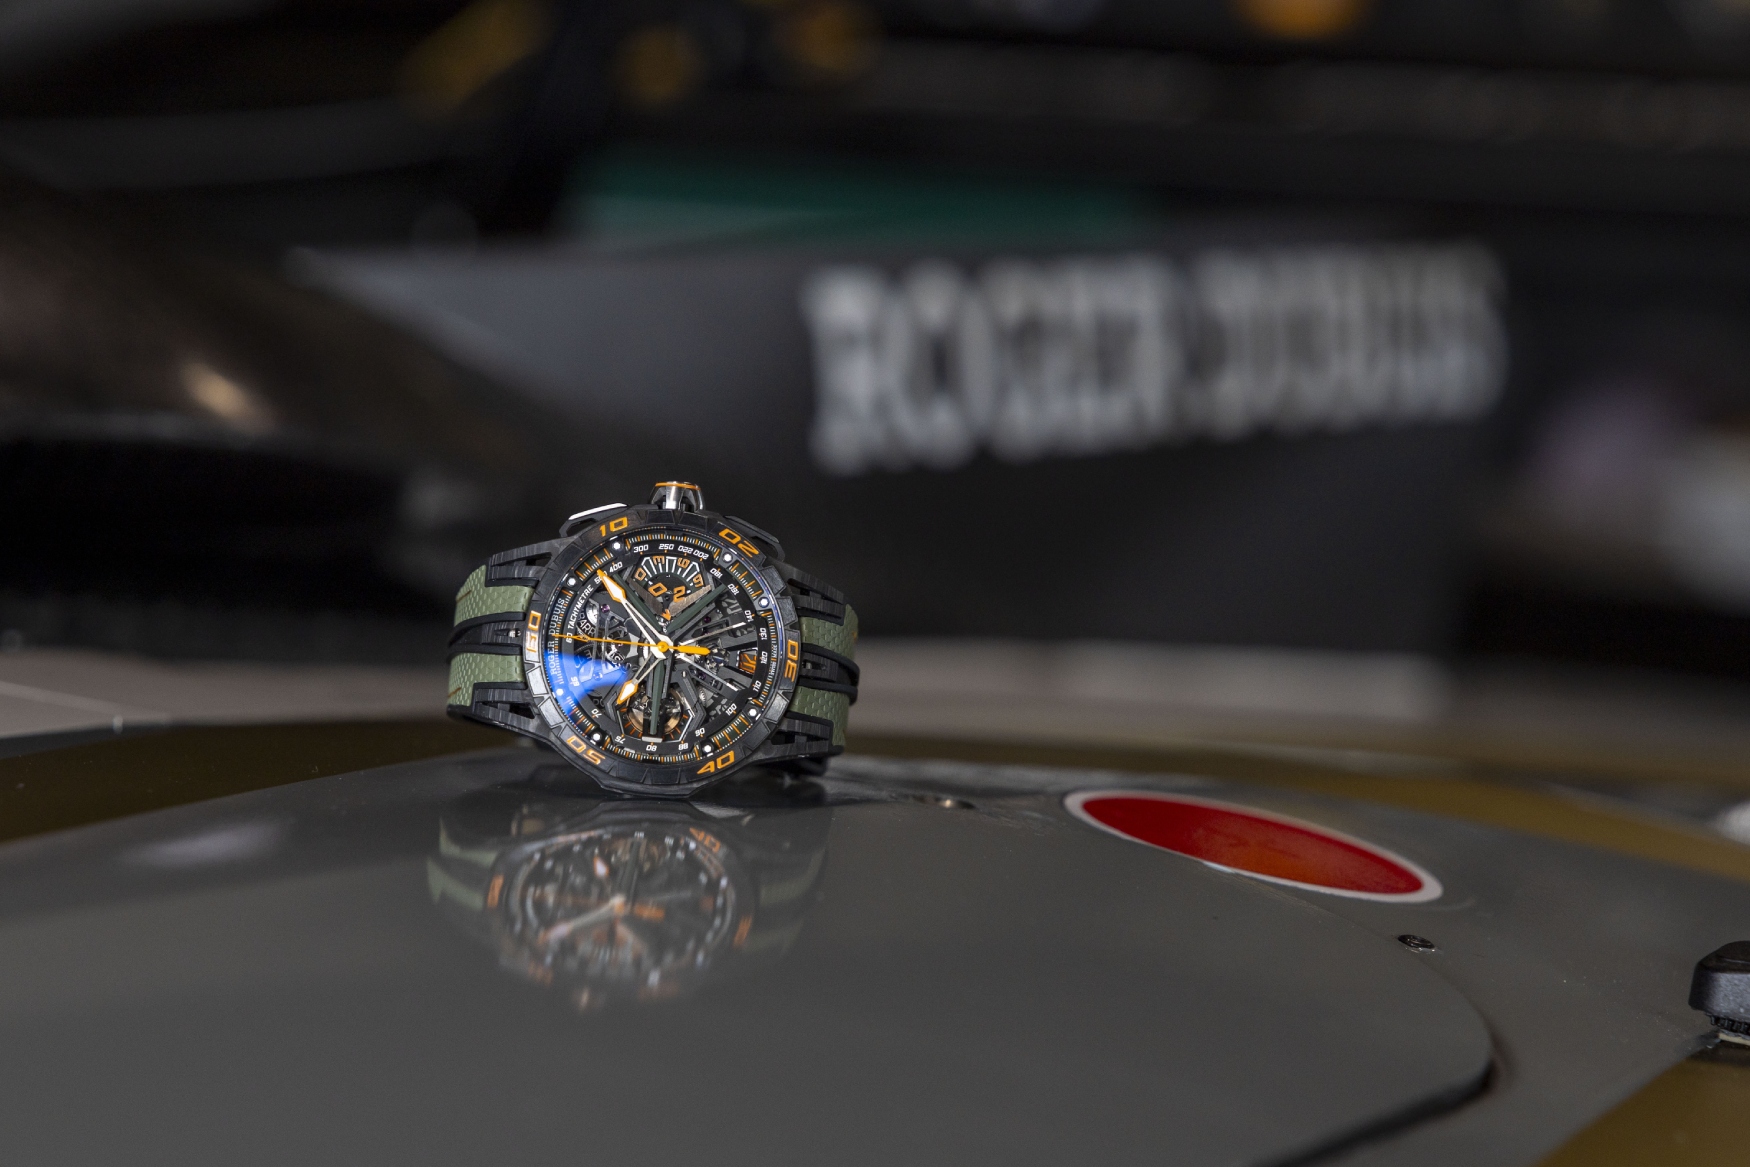 Roger Dubuis Excalibur Spider Revuelto Flyback Chronograph on car